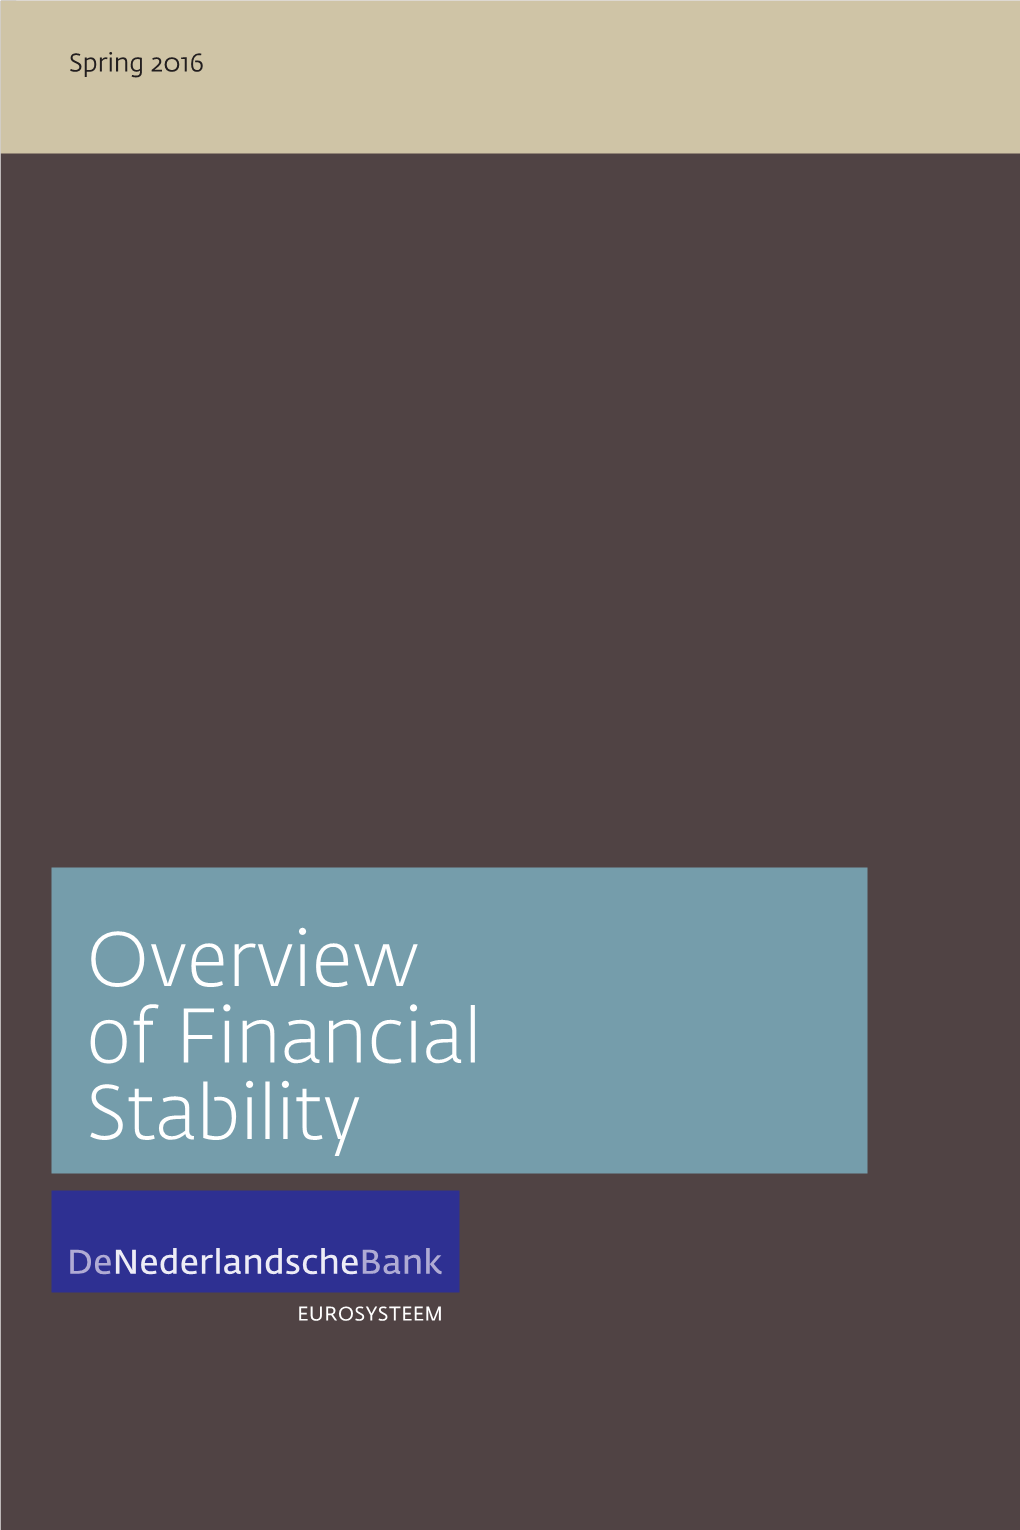 Overview of Financial Stability De Nederlandsche Bank Overview of Financial Stability Spring 2016 © 2016 De Nederlandsche Bank N.V